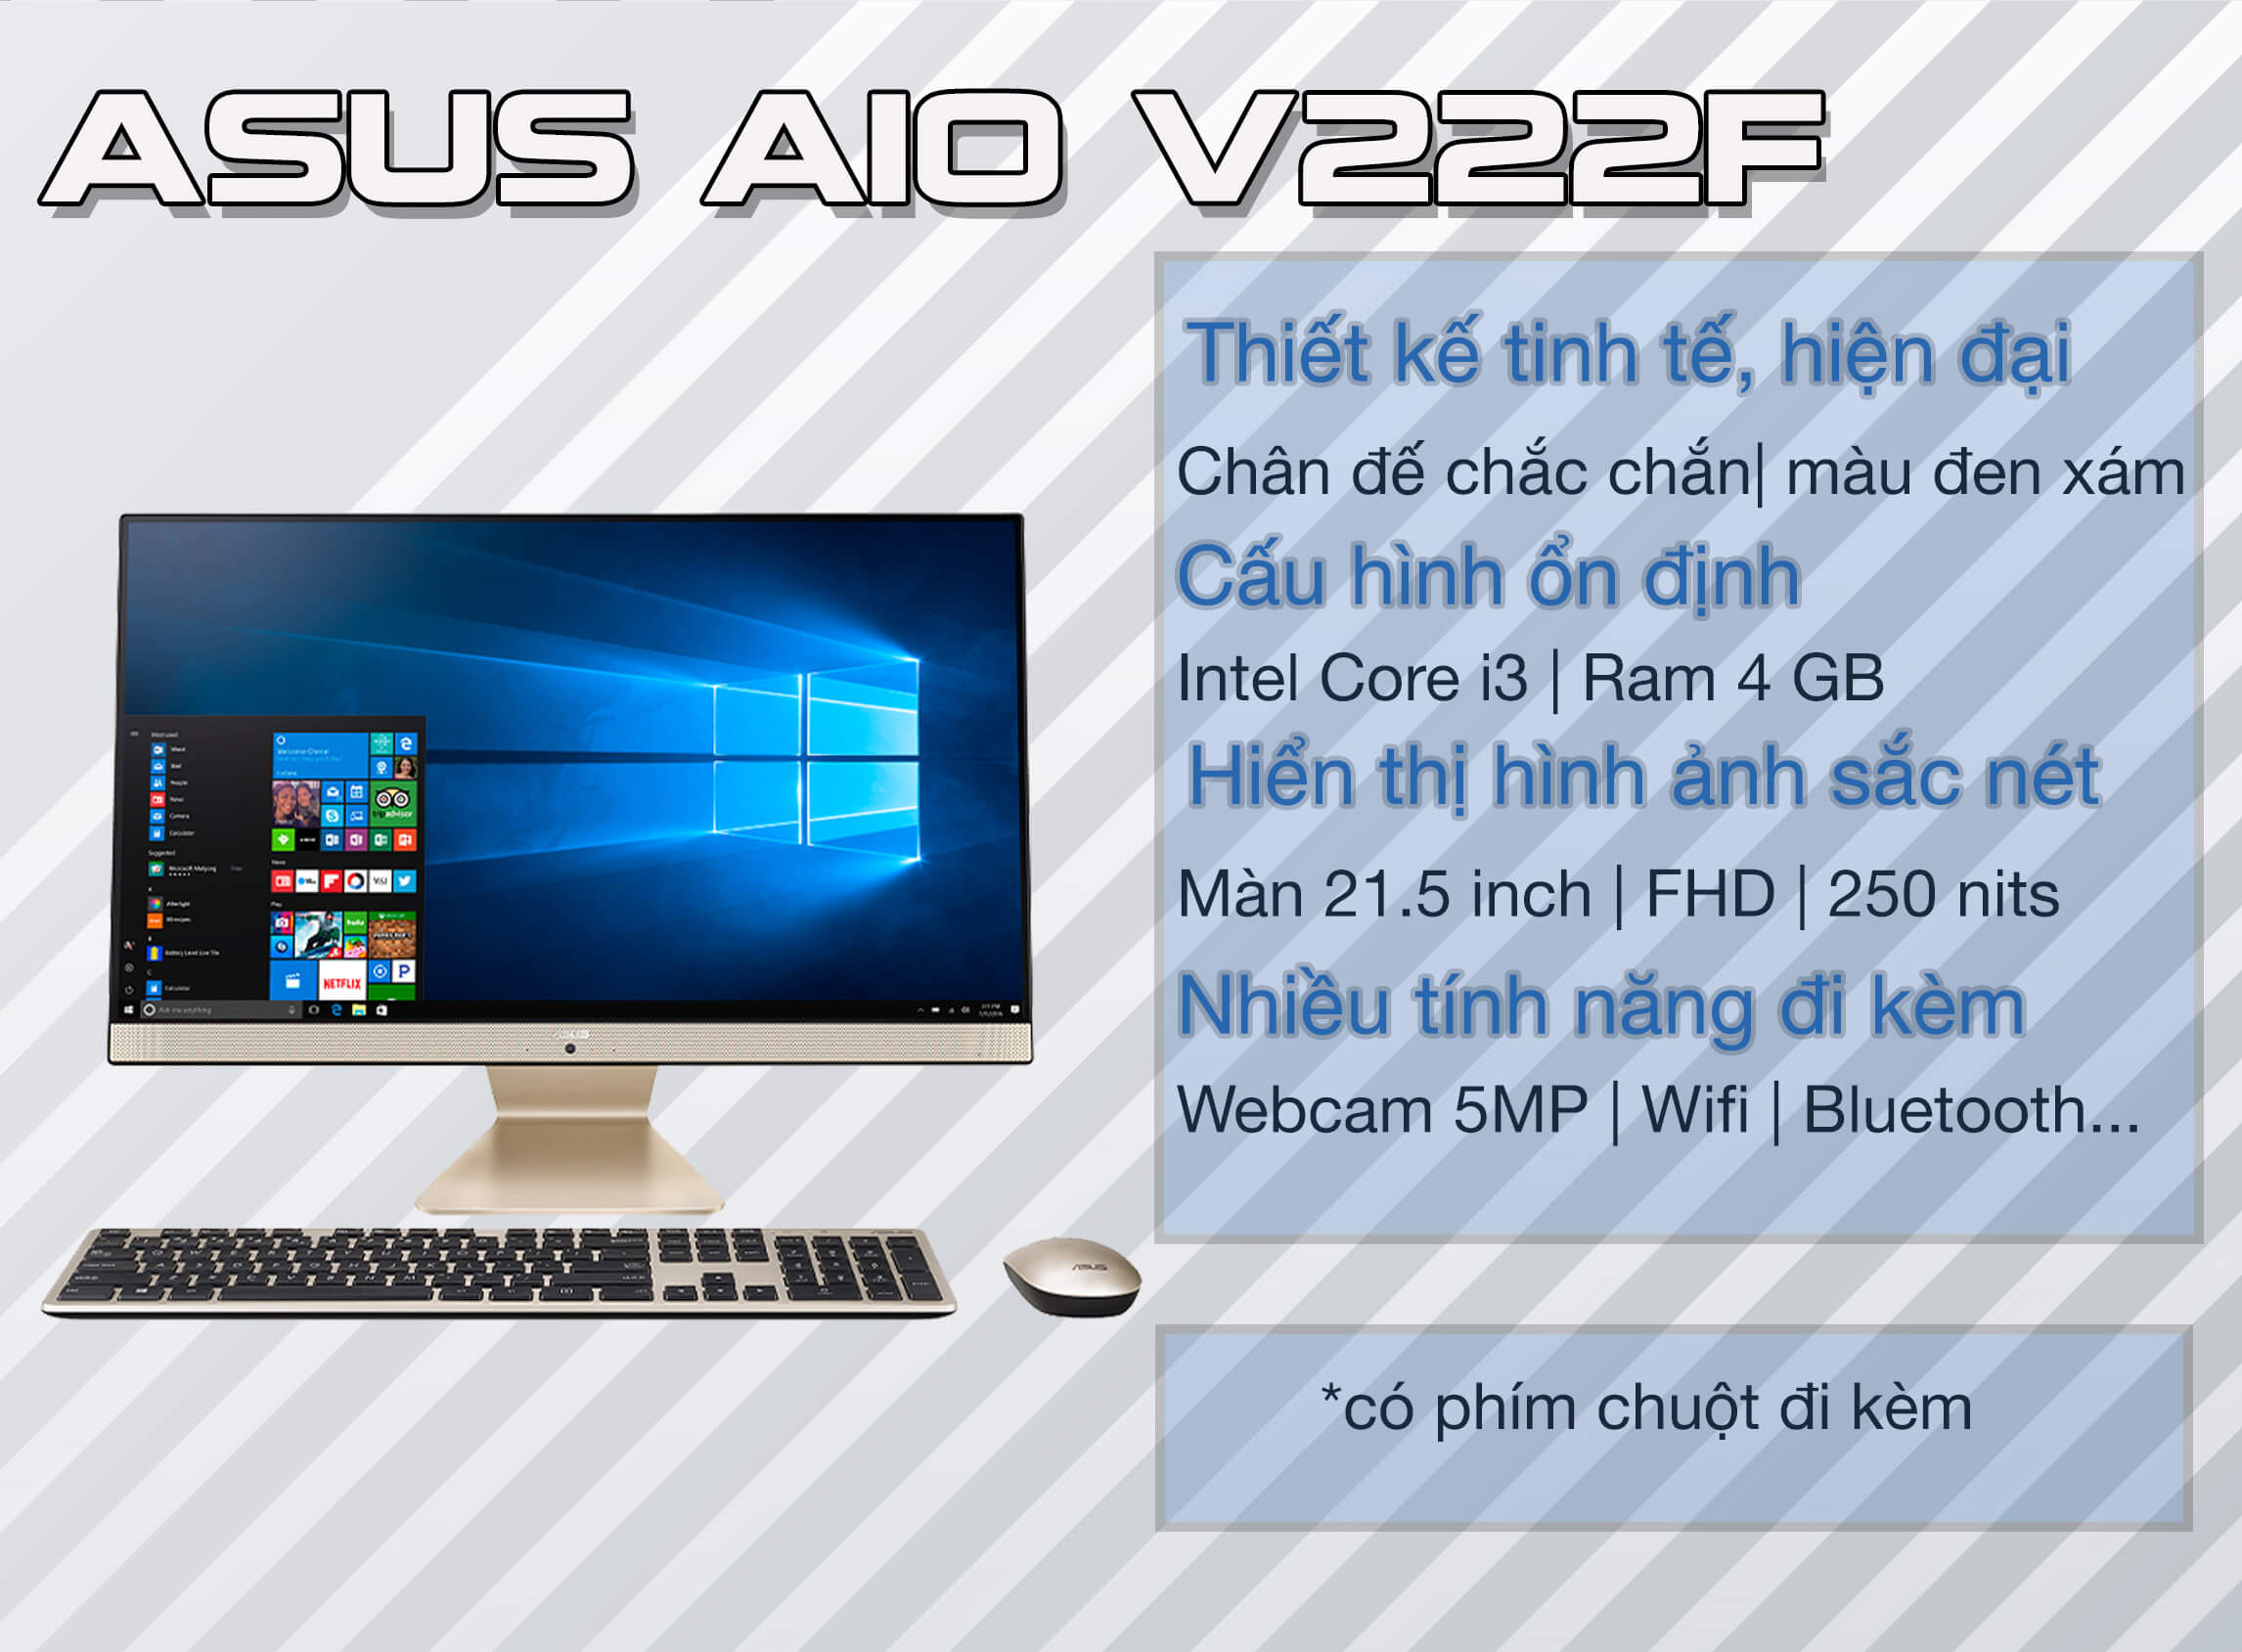 PC Asus All in One V222F a